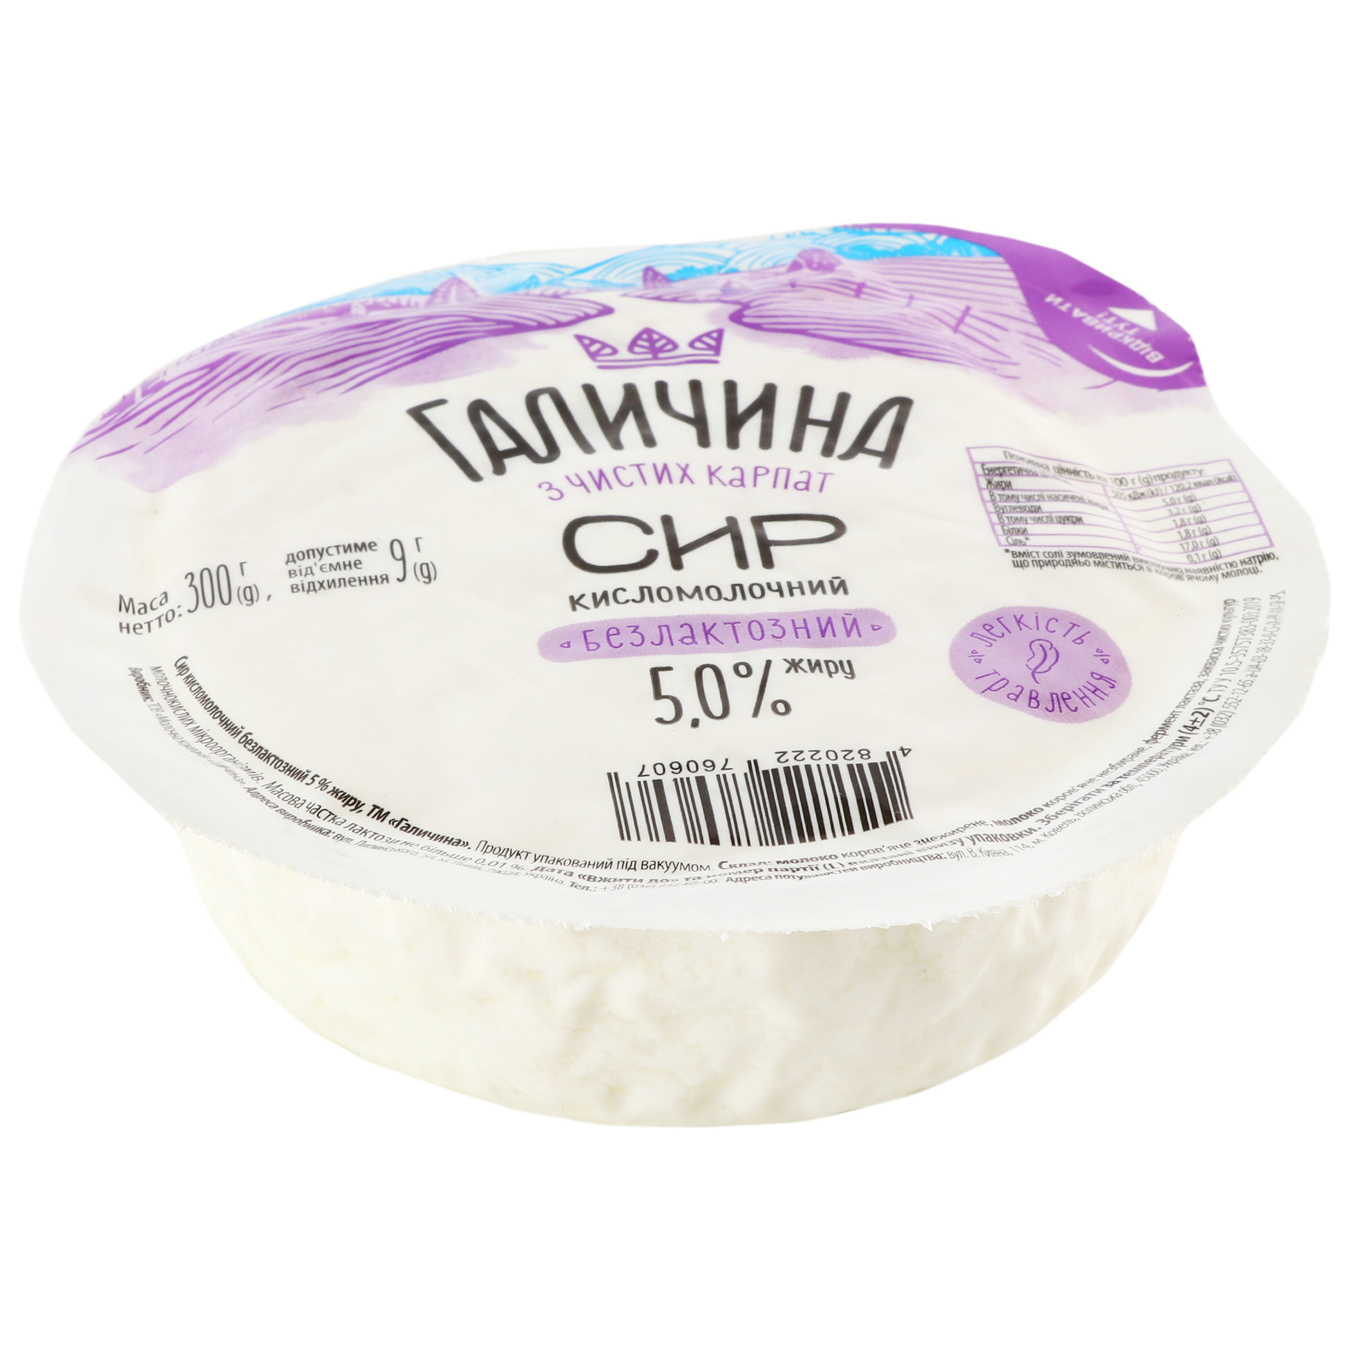 Galicia Cottage cheese lactose-free 5% 300g 3